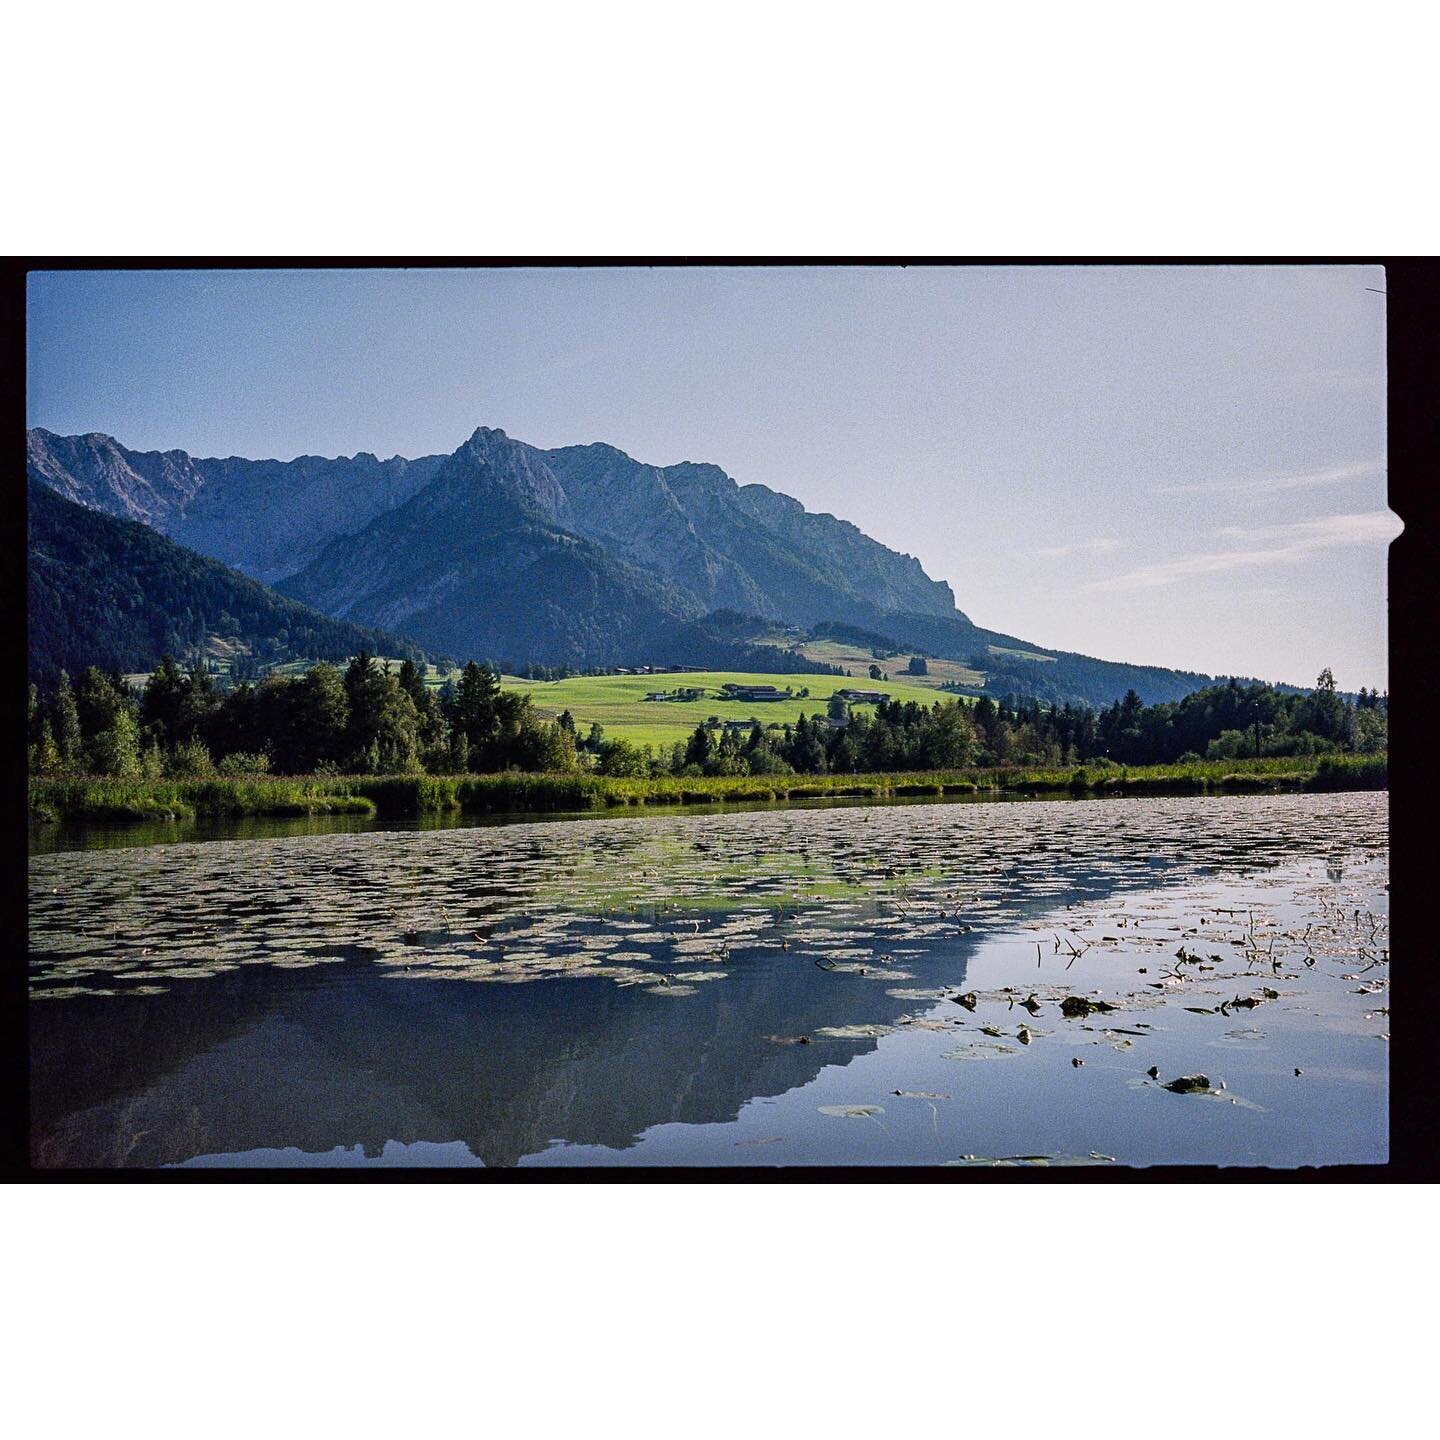 Where I would rather be now. One of our favourite family-weekend-camper-social-distancing places in Austria.
Hopefully there is a way to get there soon ;(.
.
#analogphotography #shootfilmnotpeople #silbersalz35 @kodak_shootfilm #vision3 #500t #austri